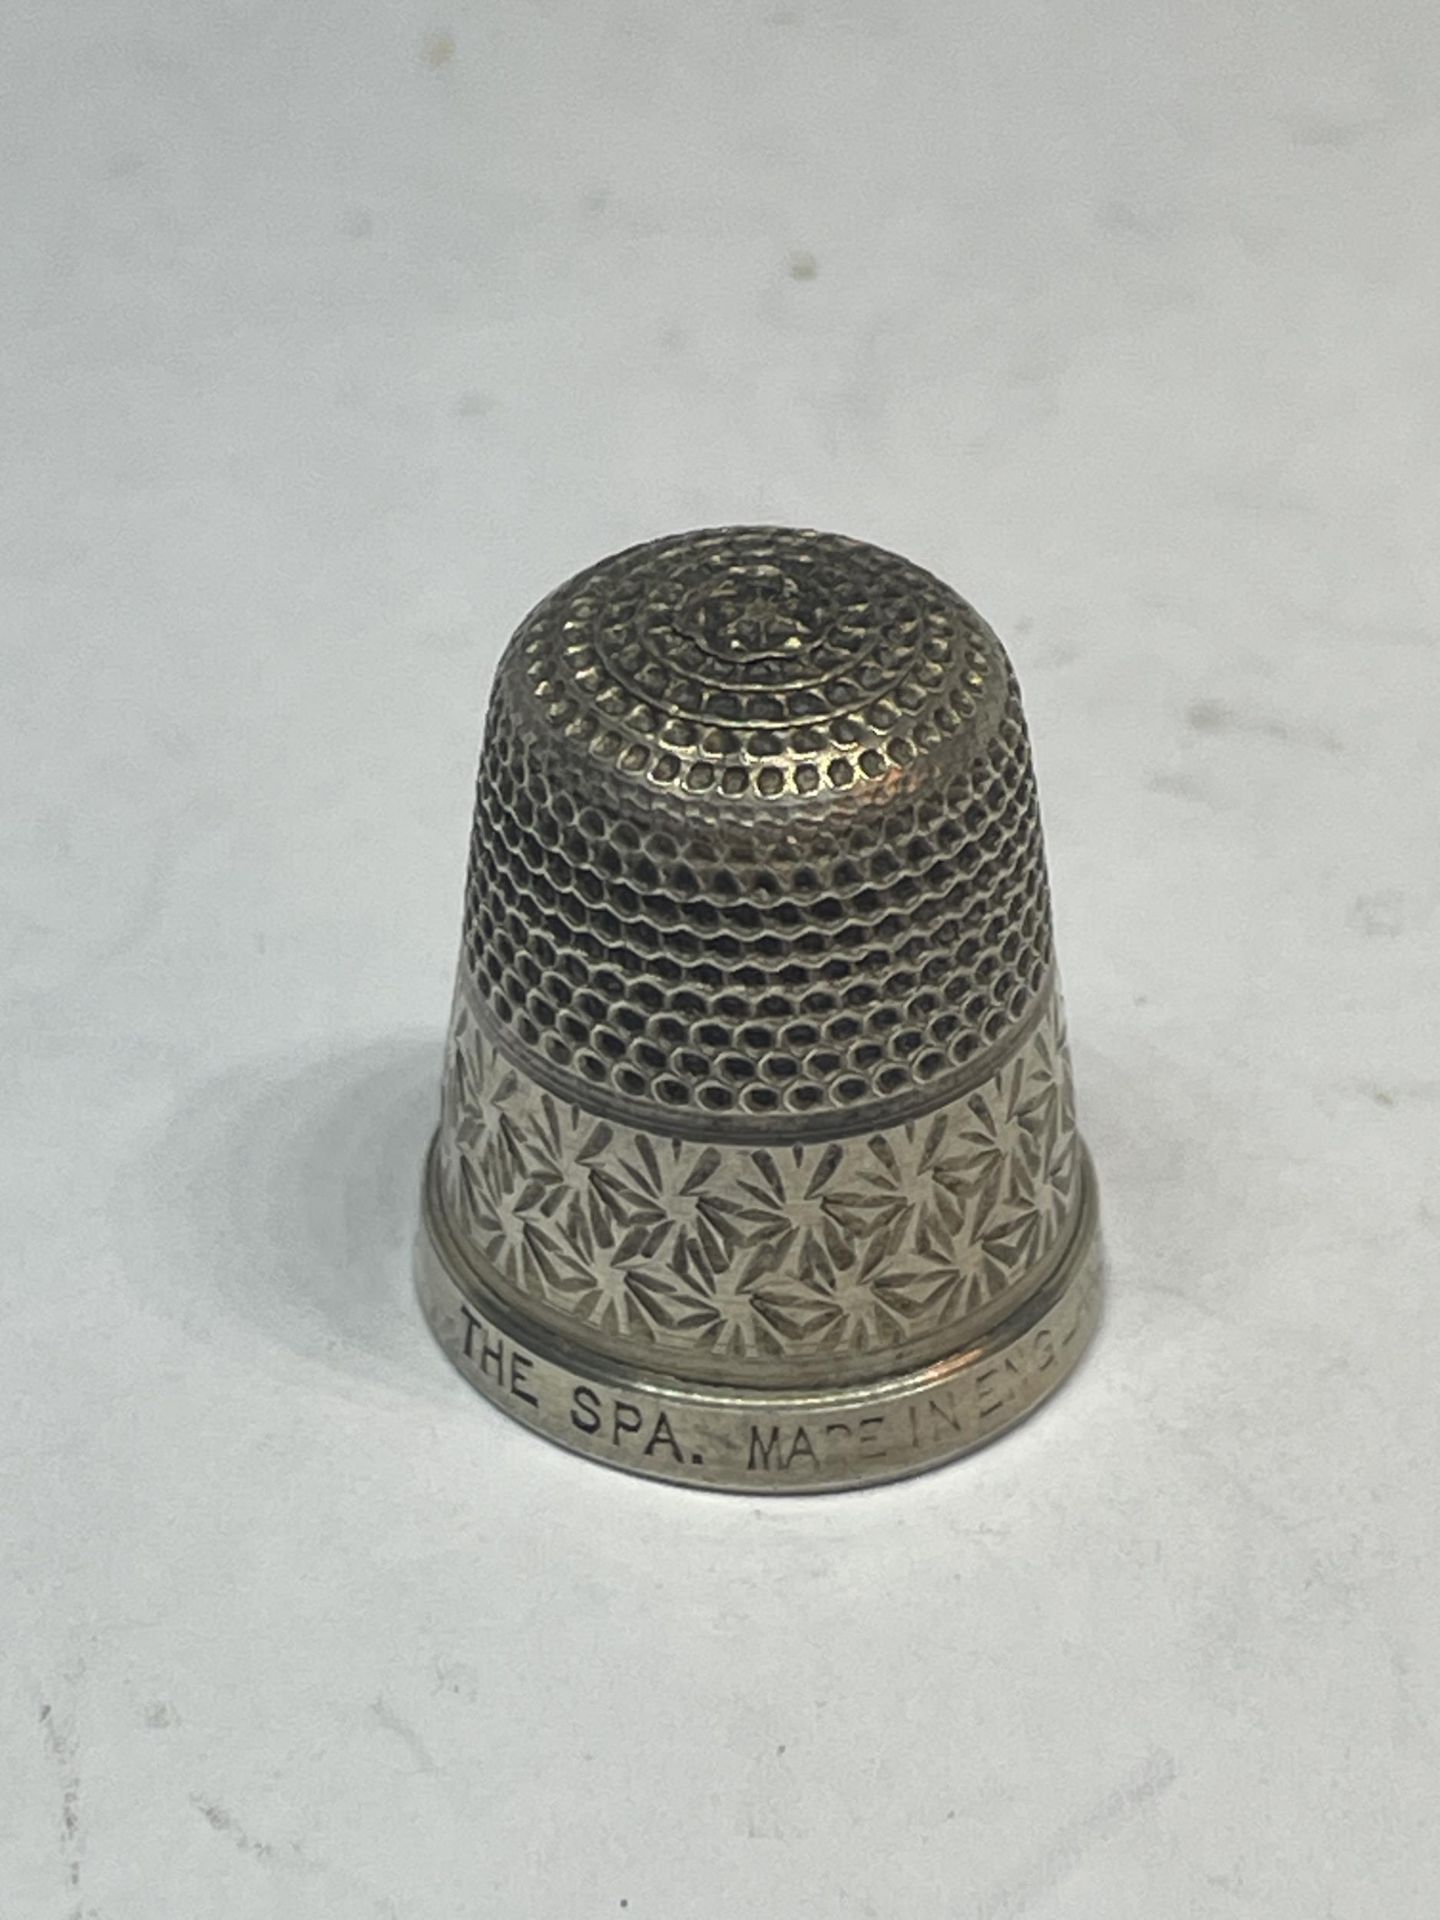 A MARKED STERLING SILVER THE SPA THIMBLE - Image 2 of 2